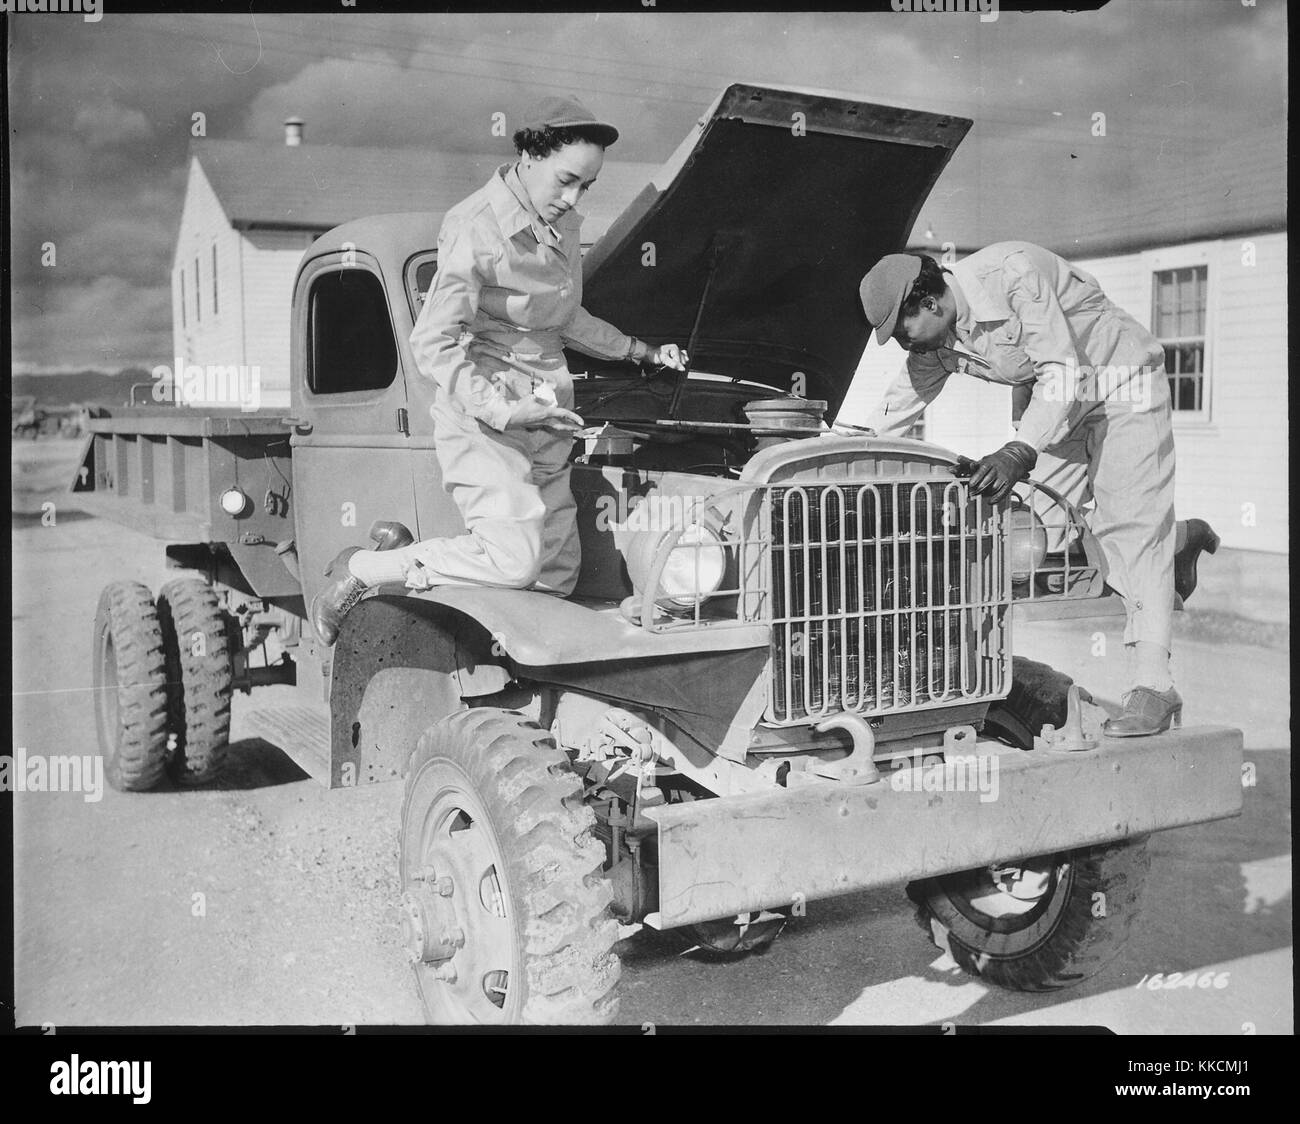 Female auxiliaries Ruth Wade and Lucille Mayo (left to right) further demonstrate their ability to service trucks as taught them during the processing period at Fort Des Moines and put into practice at Fort Huachuca, Arizona, during World War 2. Image courtesy National Archives. 1942. Stock Photo